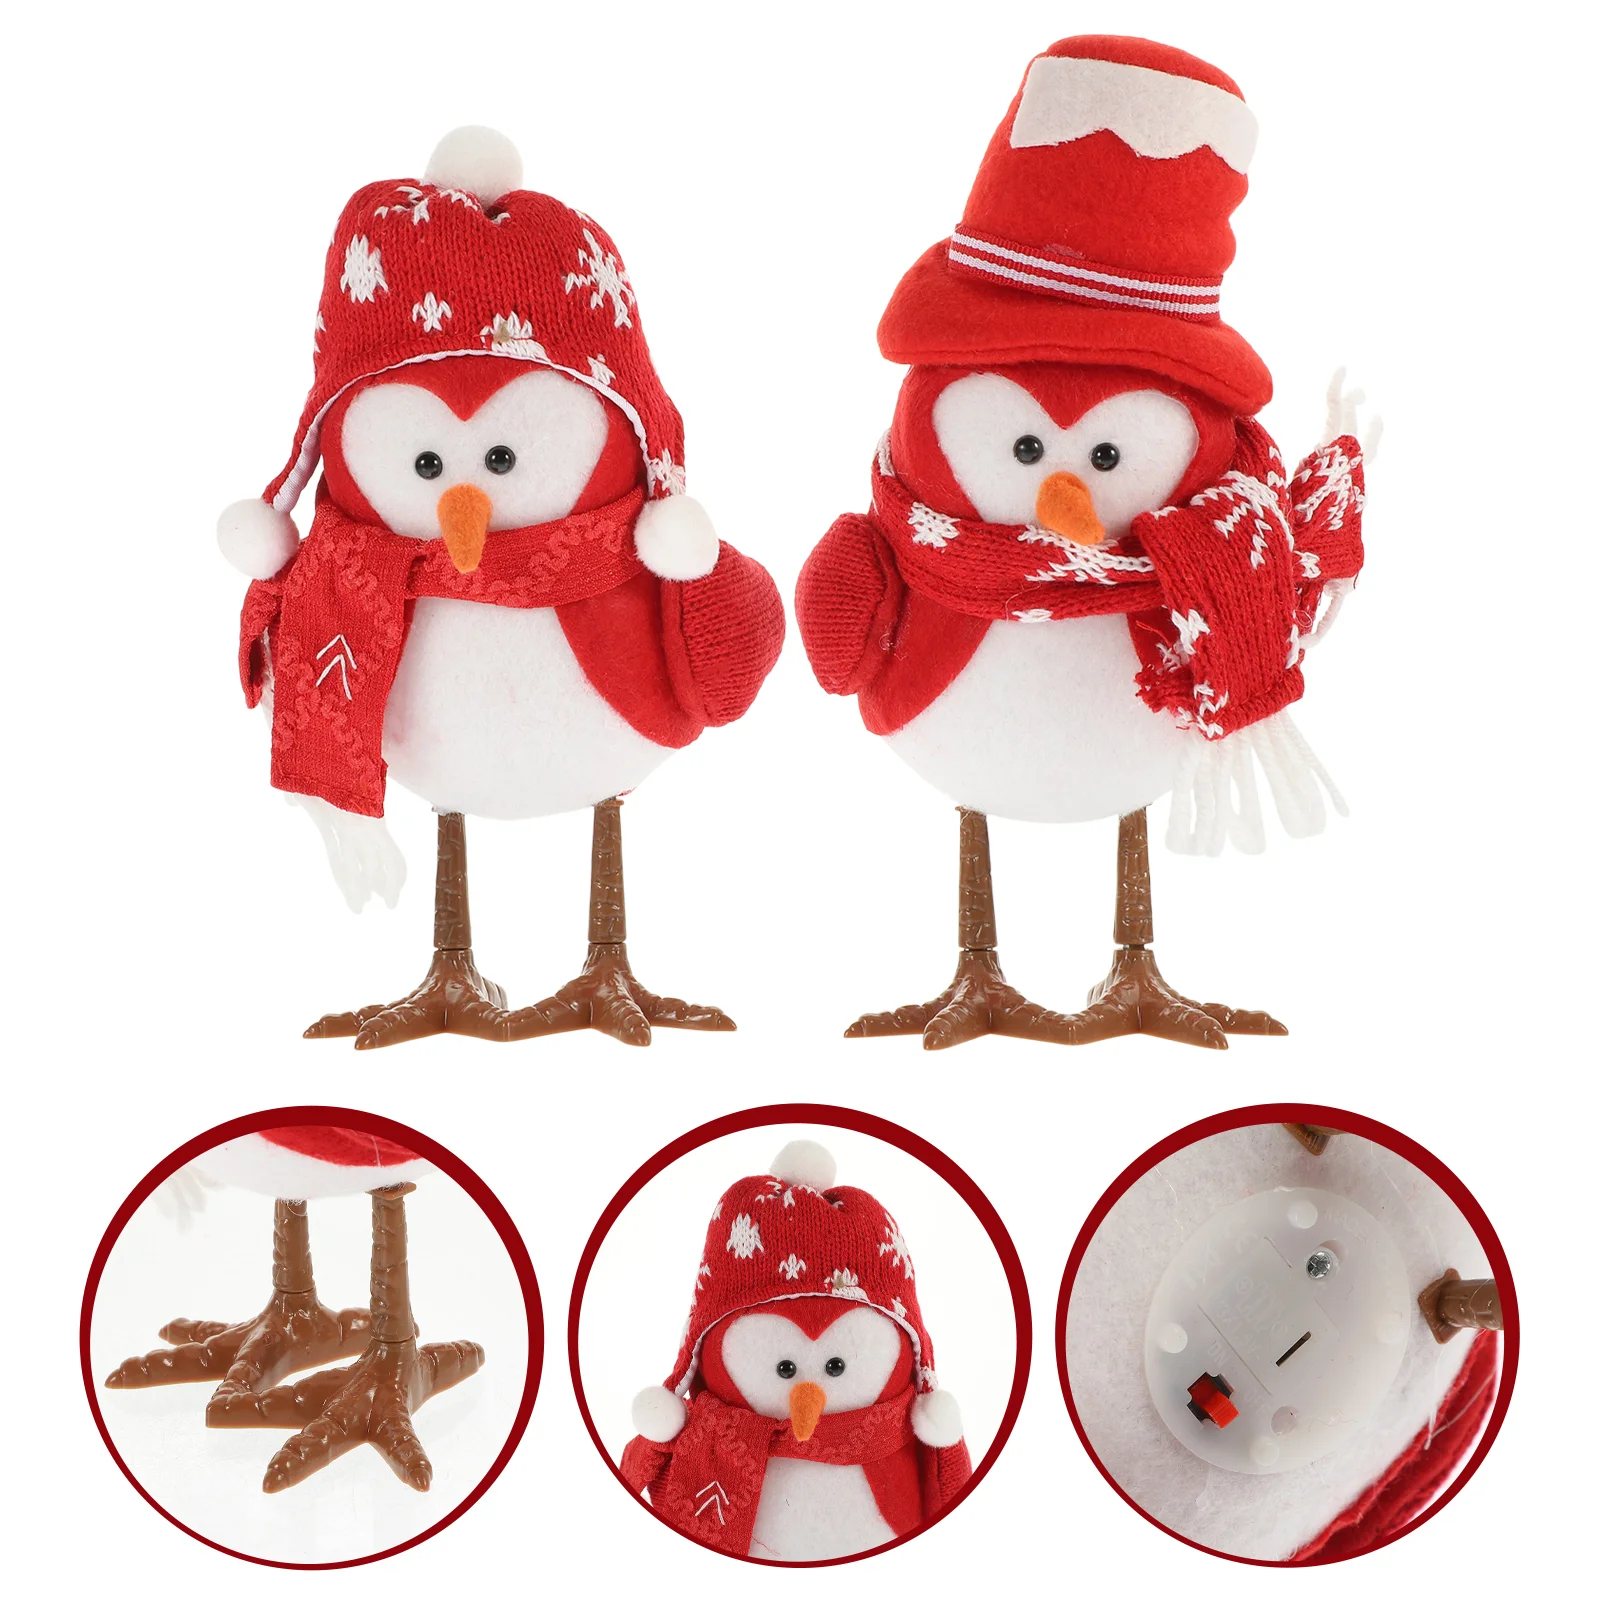 

2 Pcs Christmas Table Centerpiece Glowing Decoration Bird Shine Lighted Cloth Plush Adornment Gifts